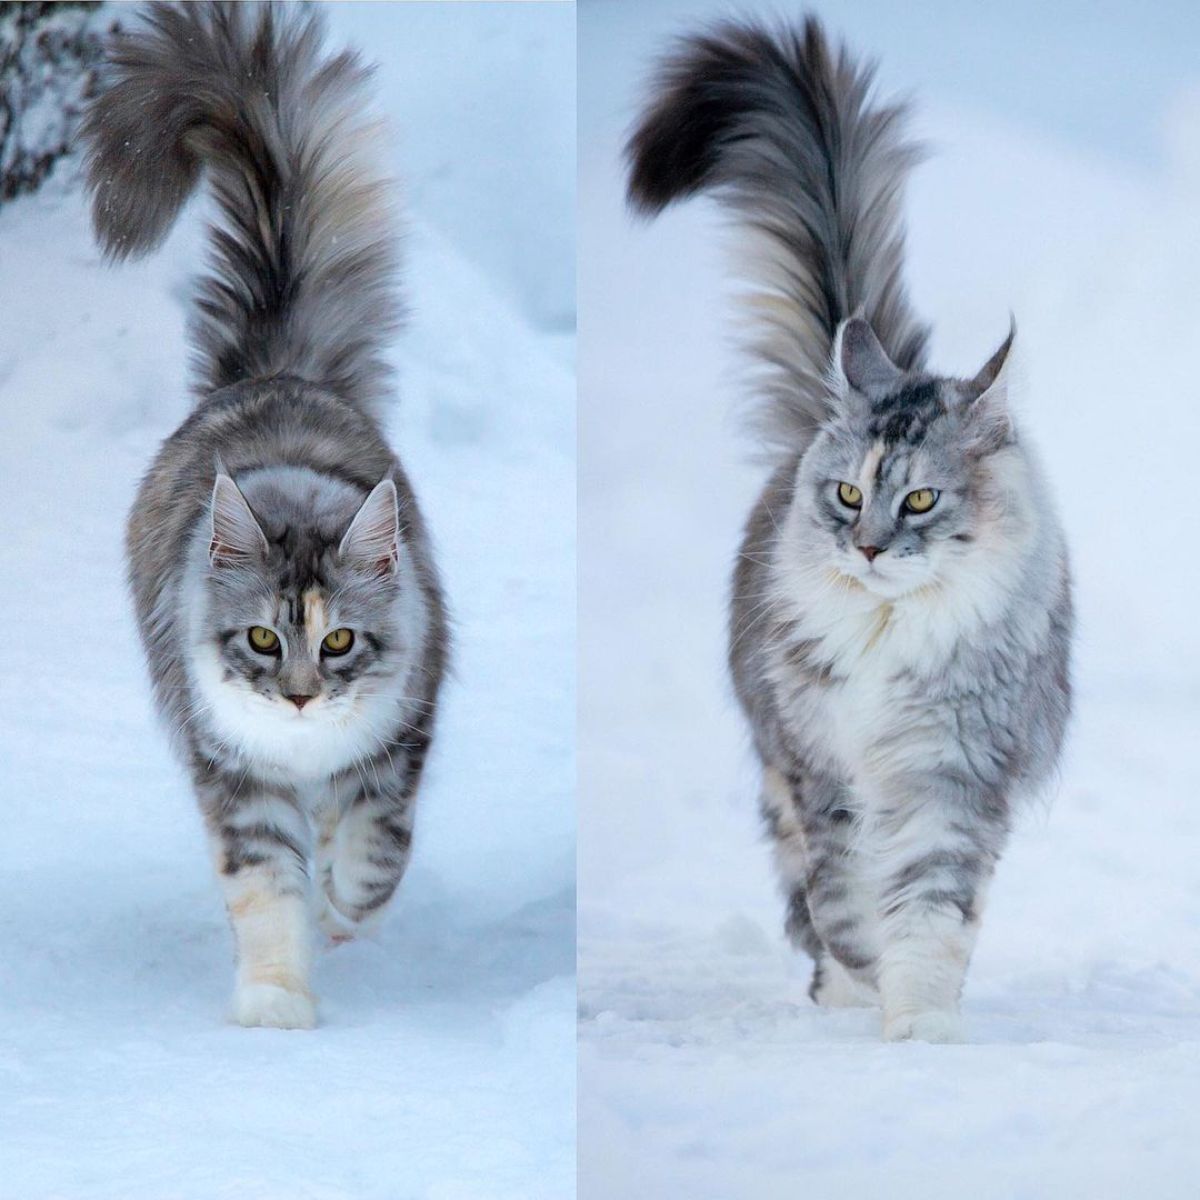 Two images of gray fluffy maine coon in snow.